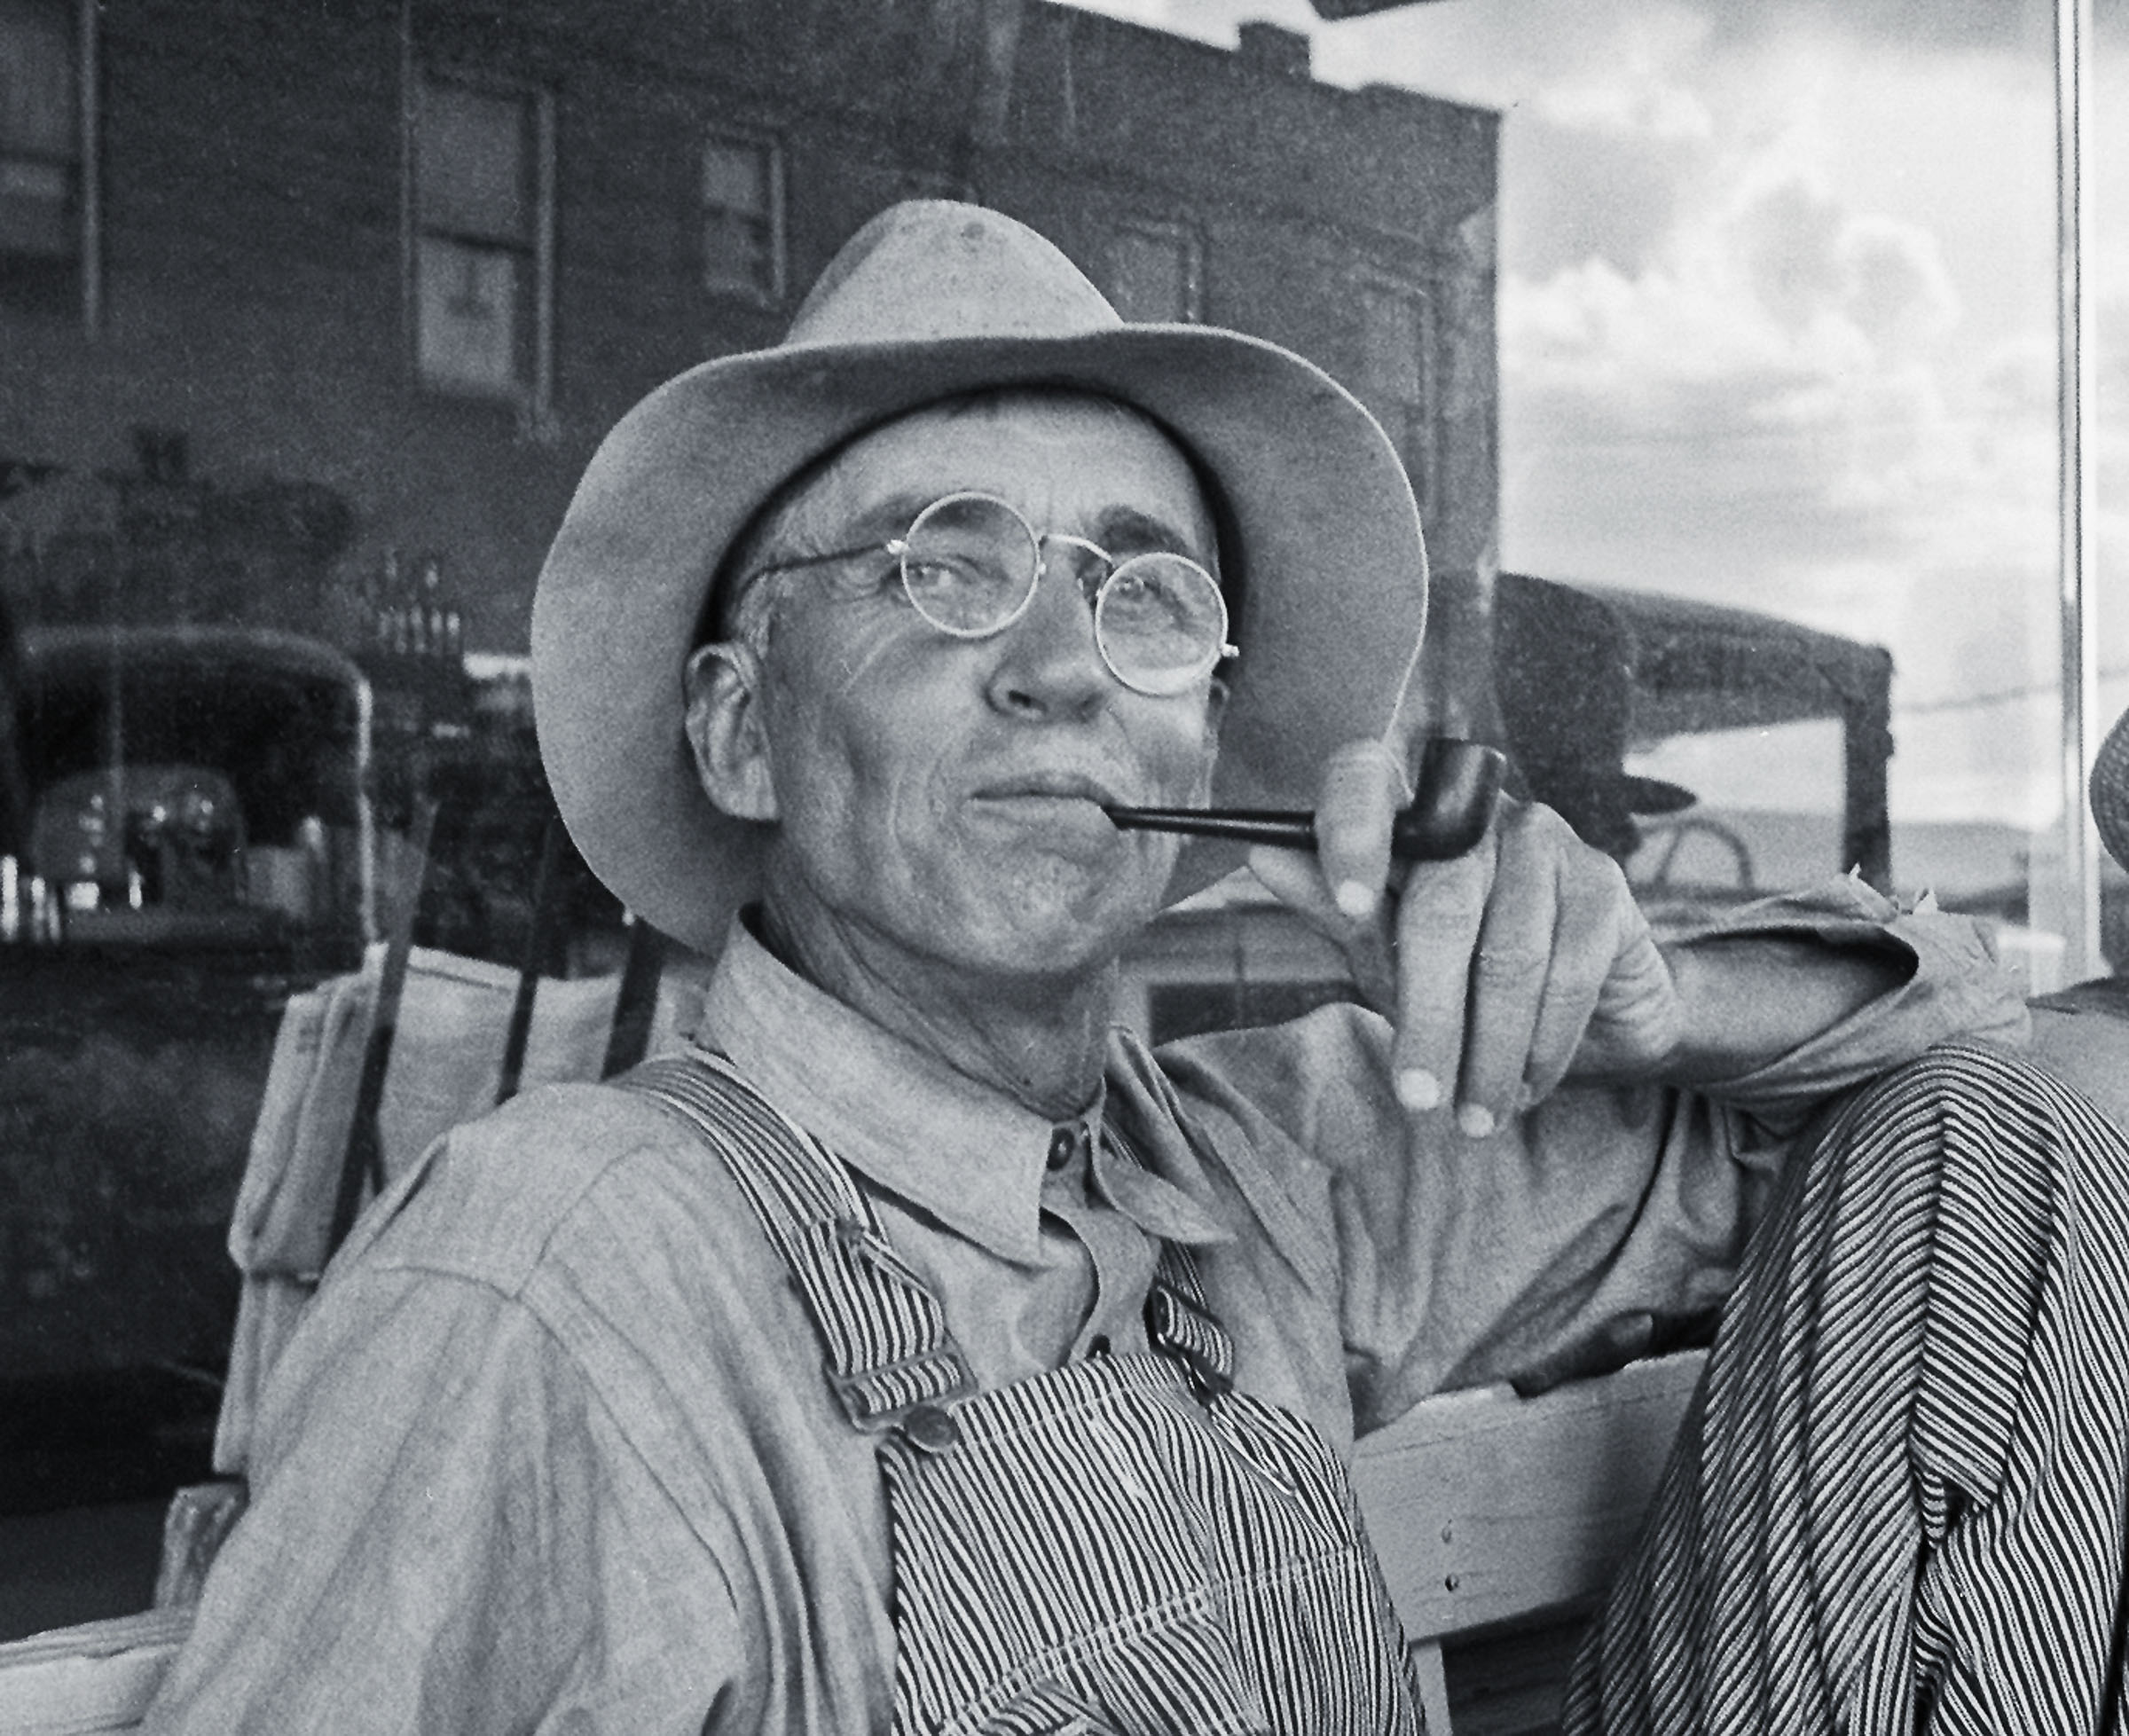 A man with a crooked wide-brimmed hat and crooked glasses smokes a piipe as a dust storm blows behind him